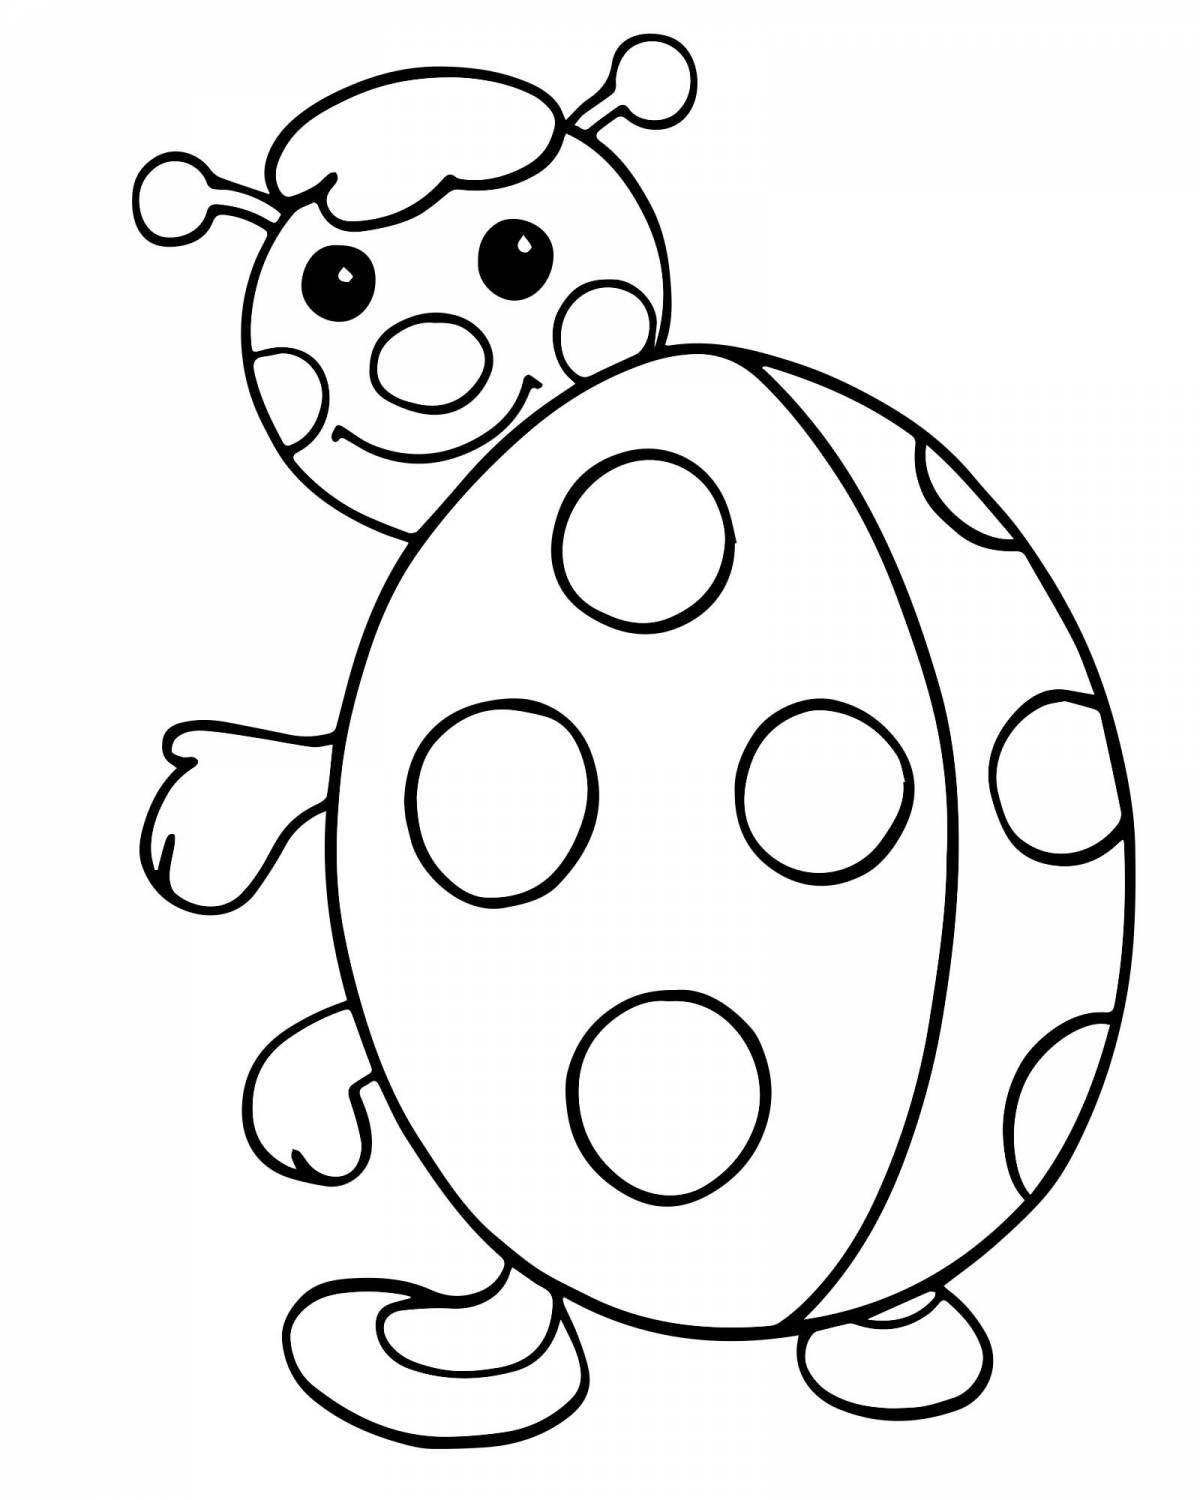 Colorful ladybug coloring page for kids